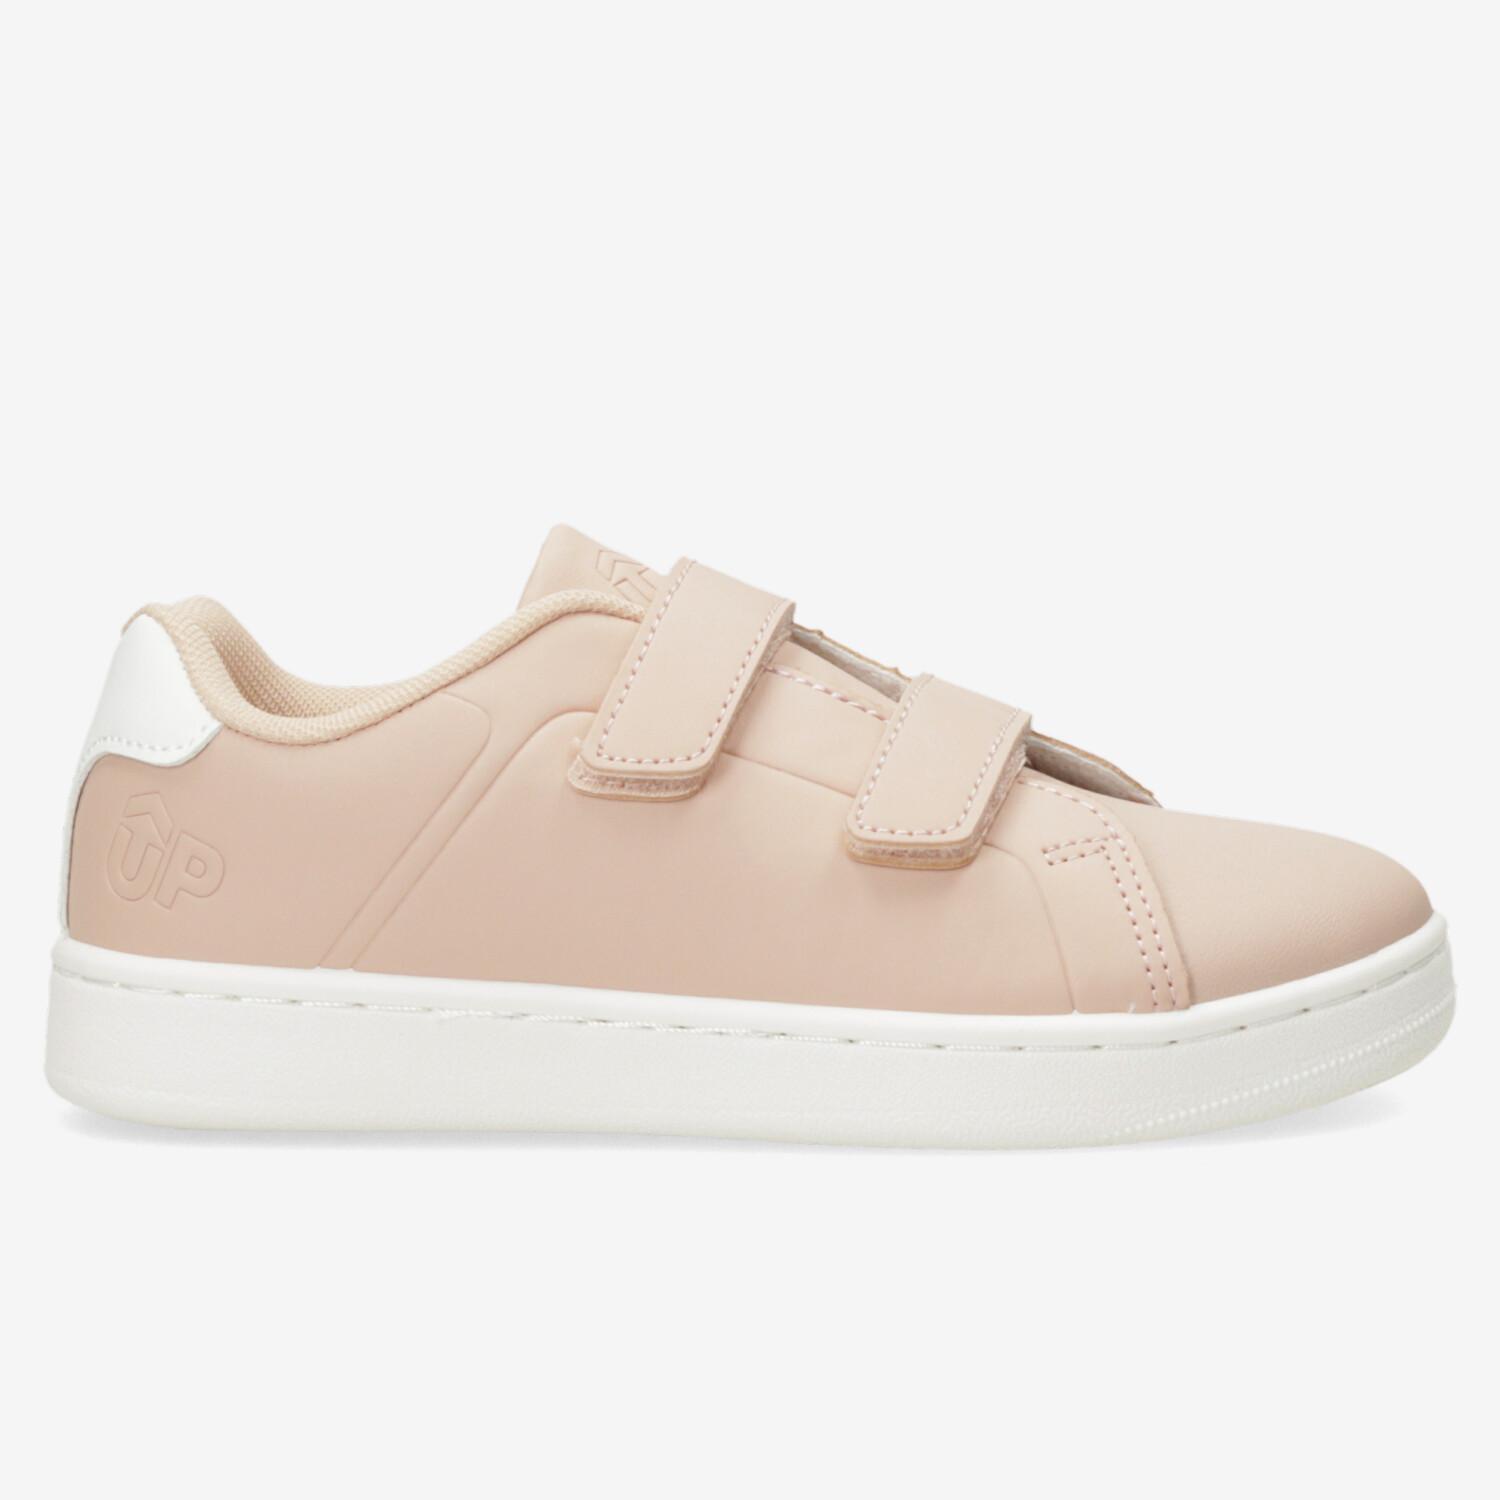 Up Arena - Rose - Chaussures Velcro Fille sports taille 29